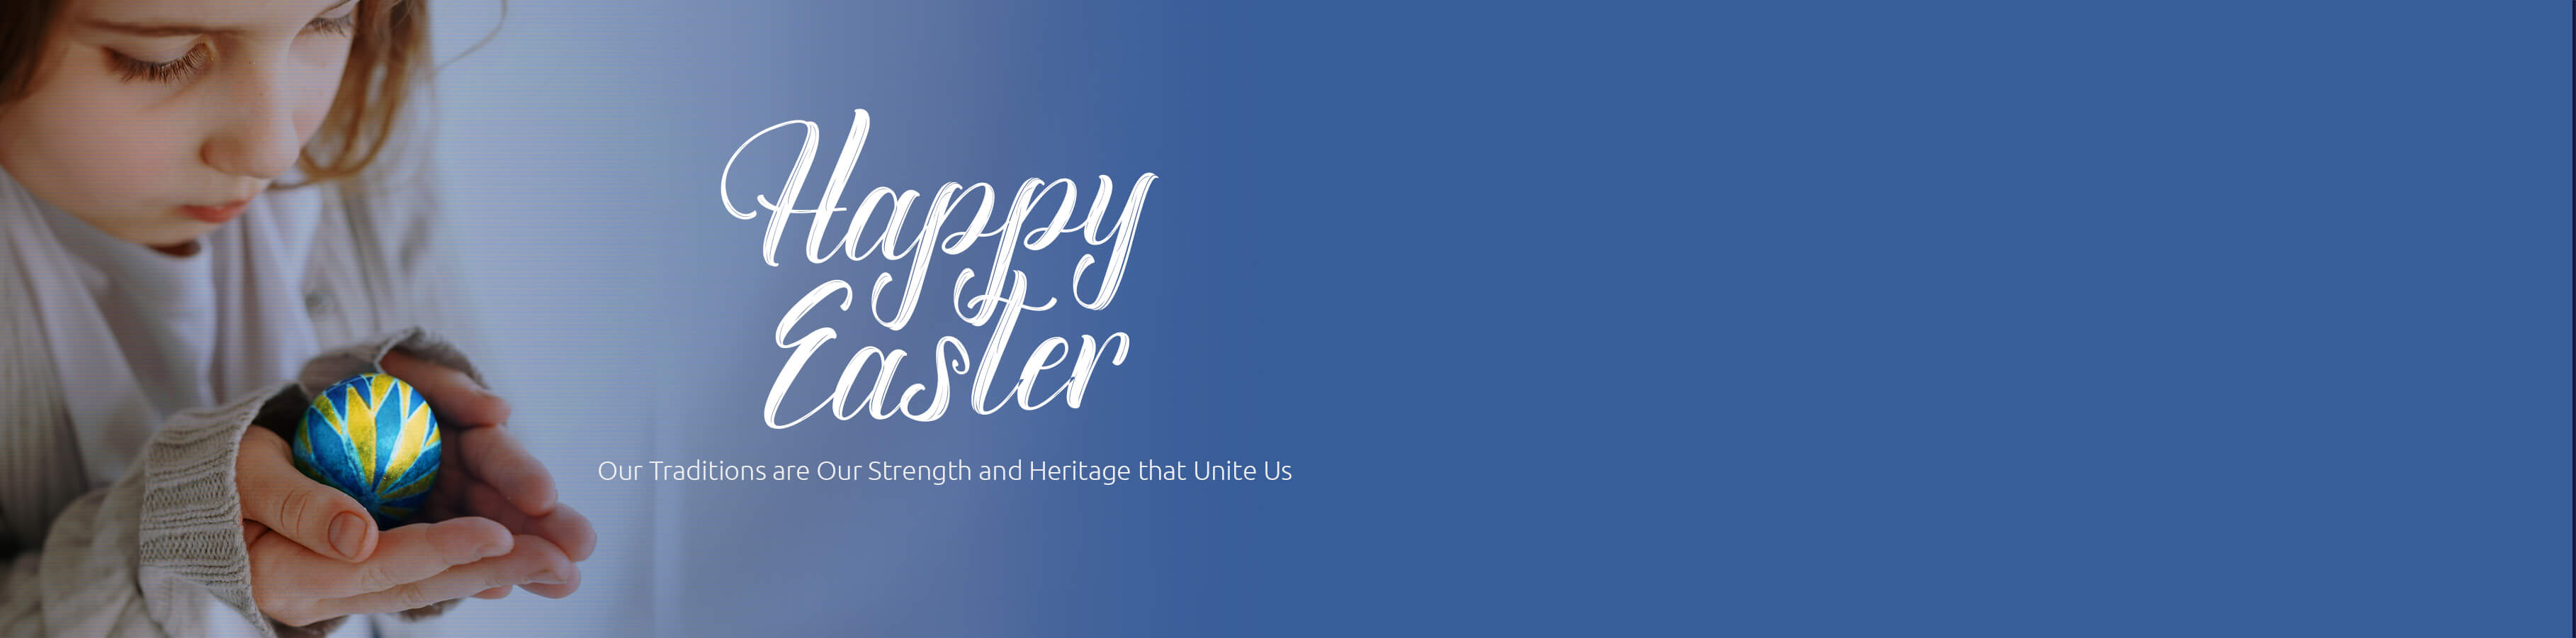 Happy Easter! Our Traditions are Our Strength and Heritage that Unites Us